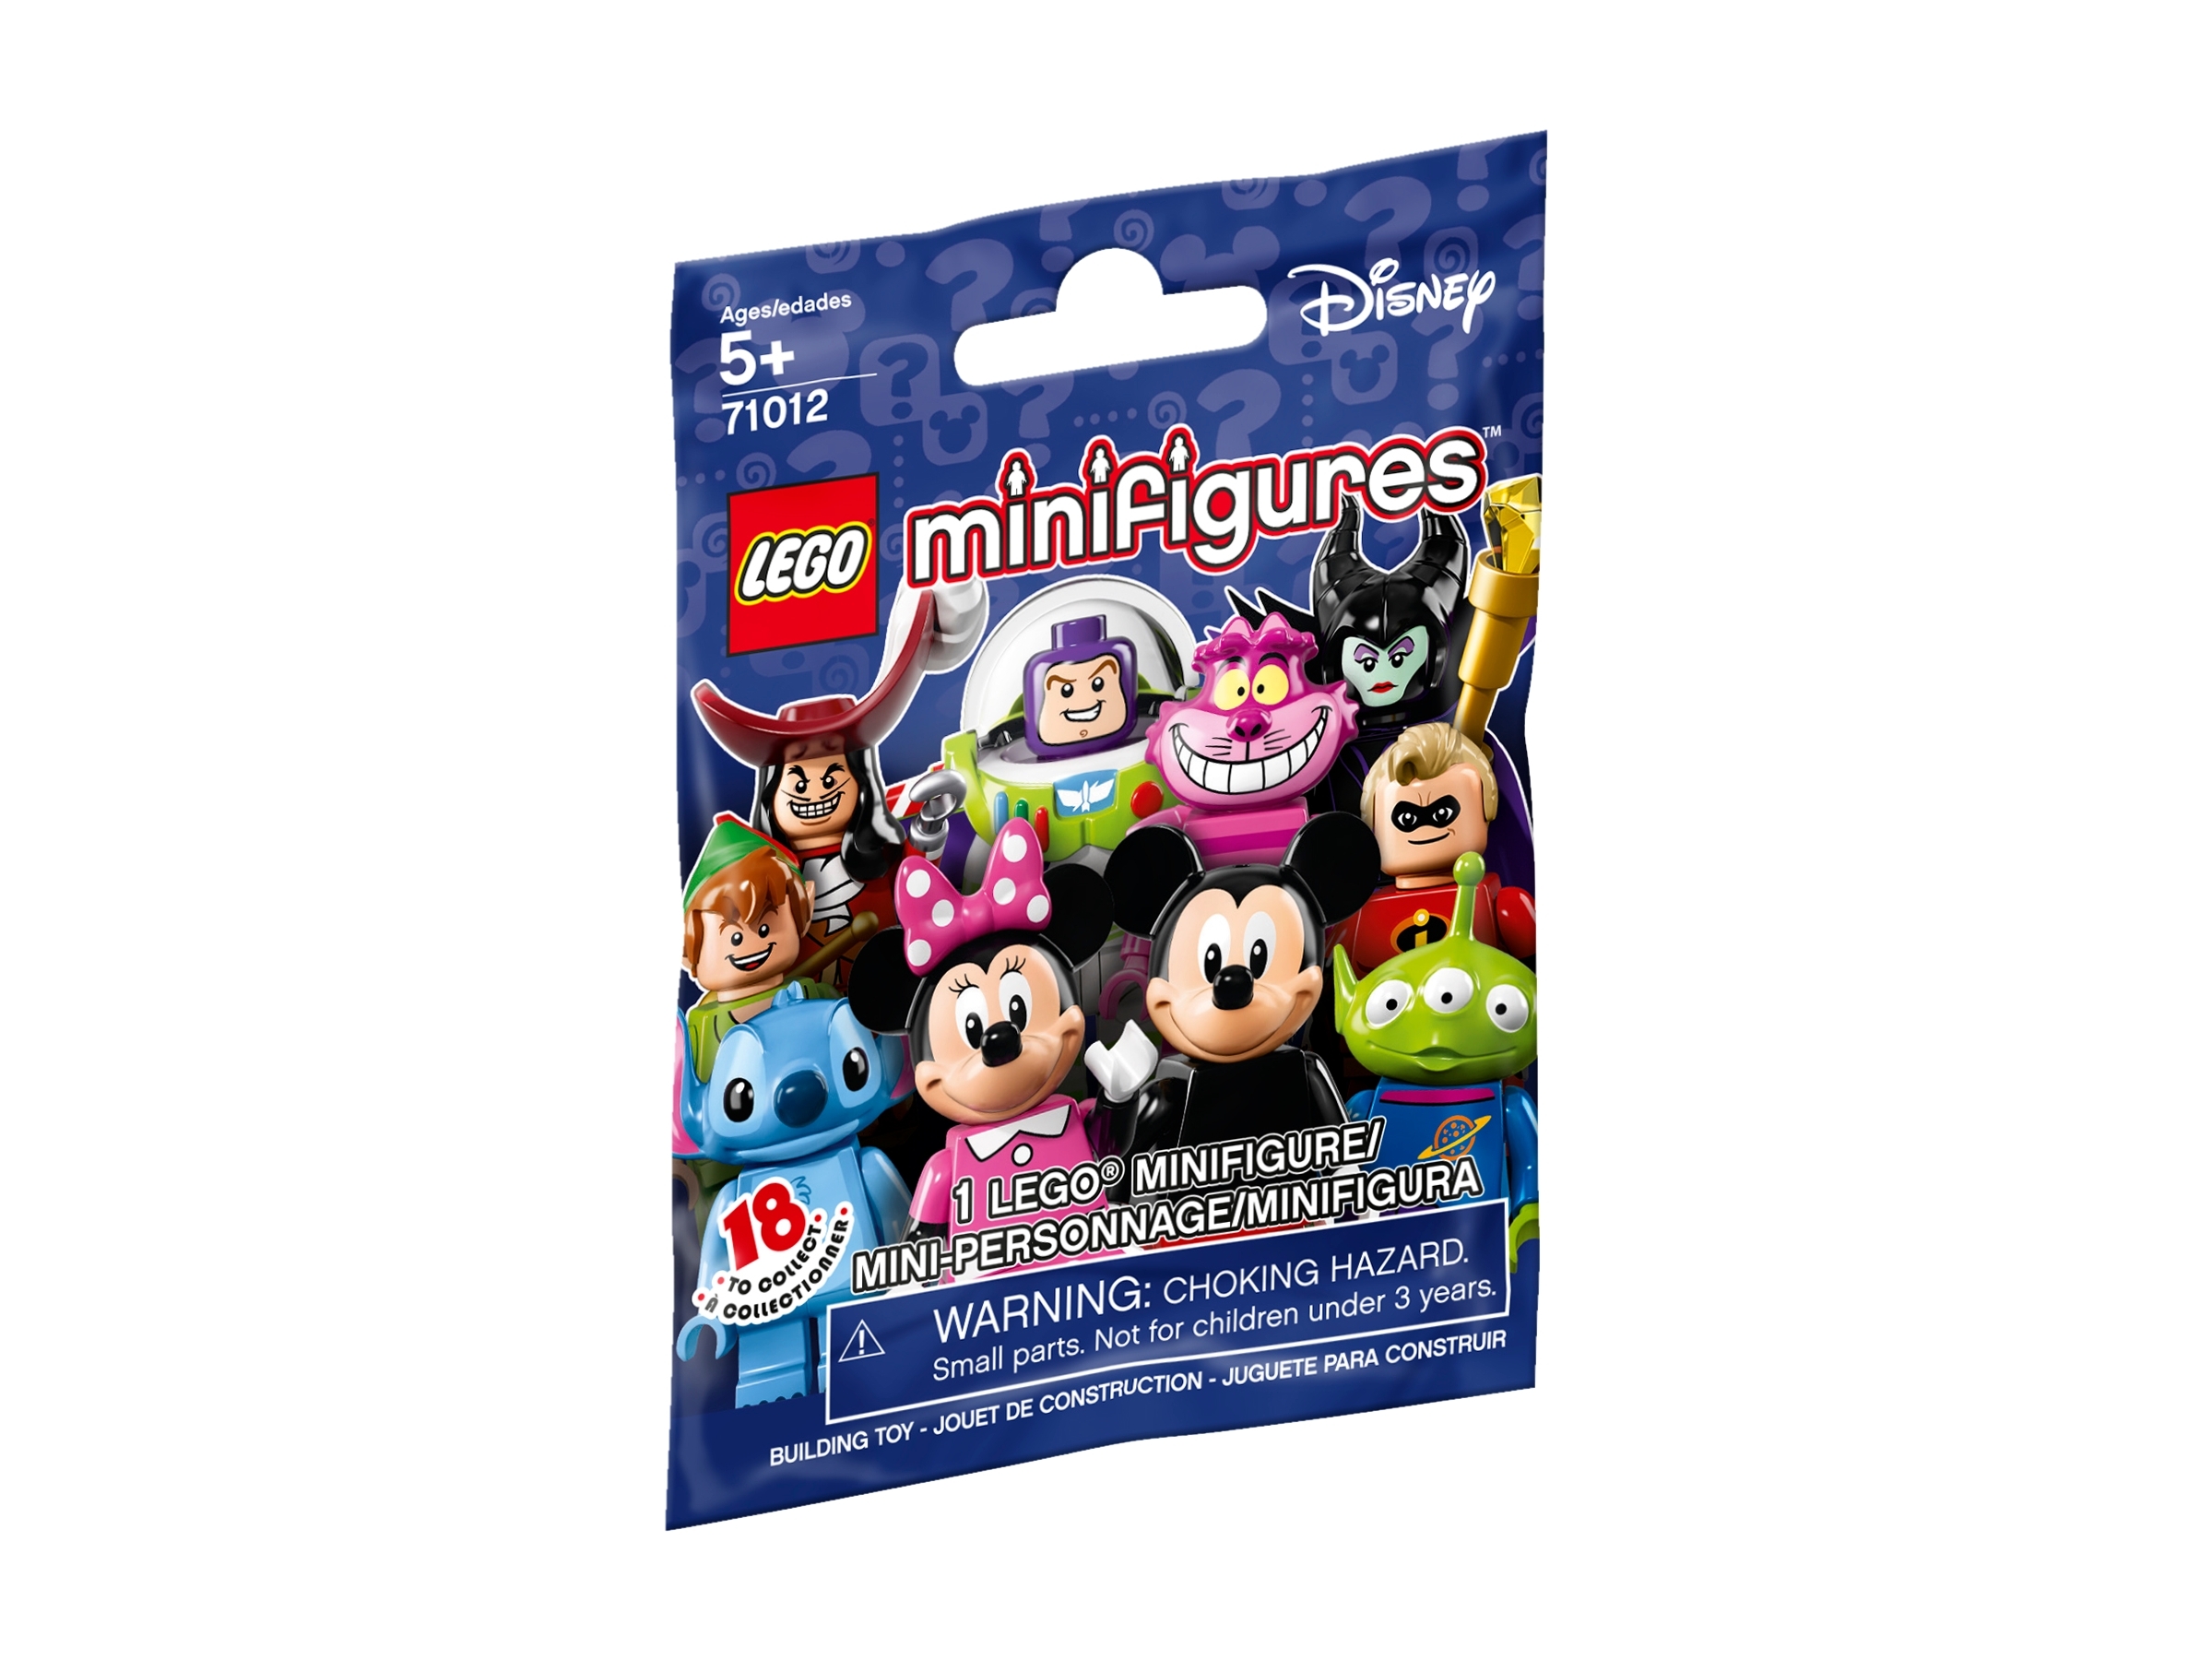 Select your character Lego Minifigures Disney Series 1 